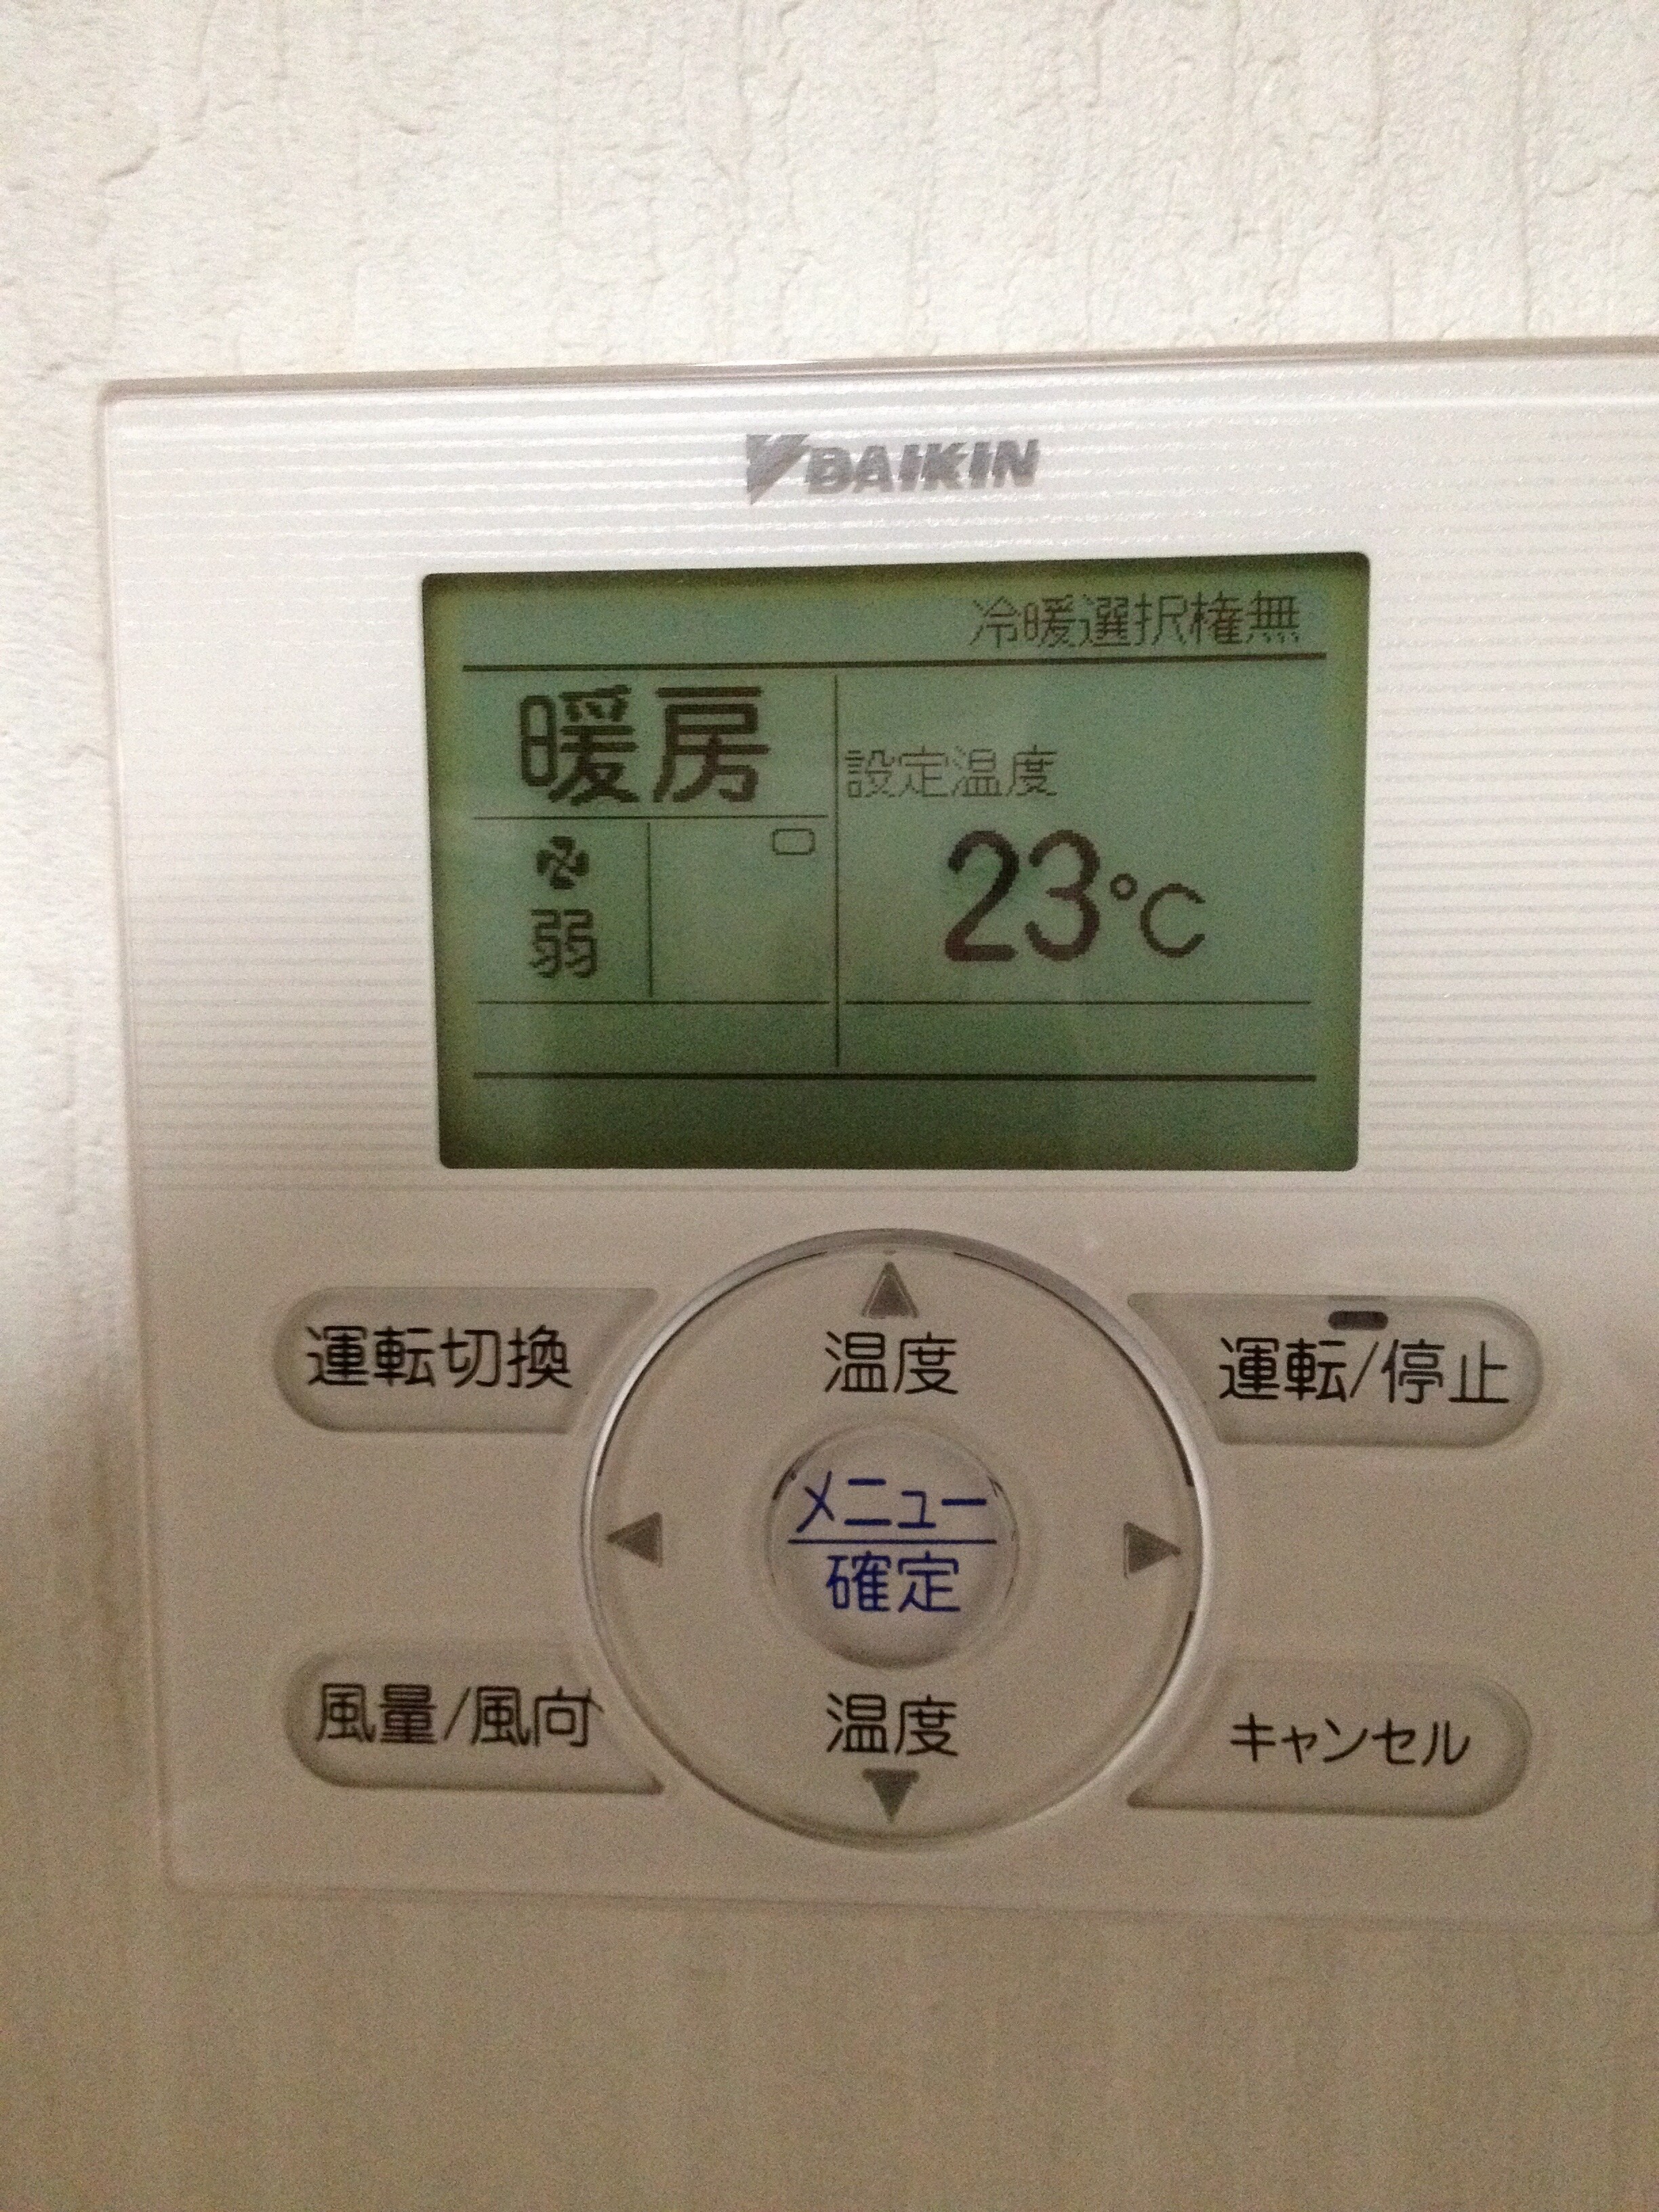 Air conditioner operation terminal in the guest room